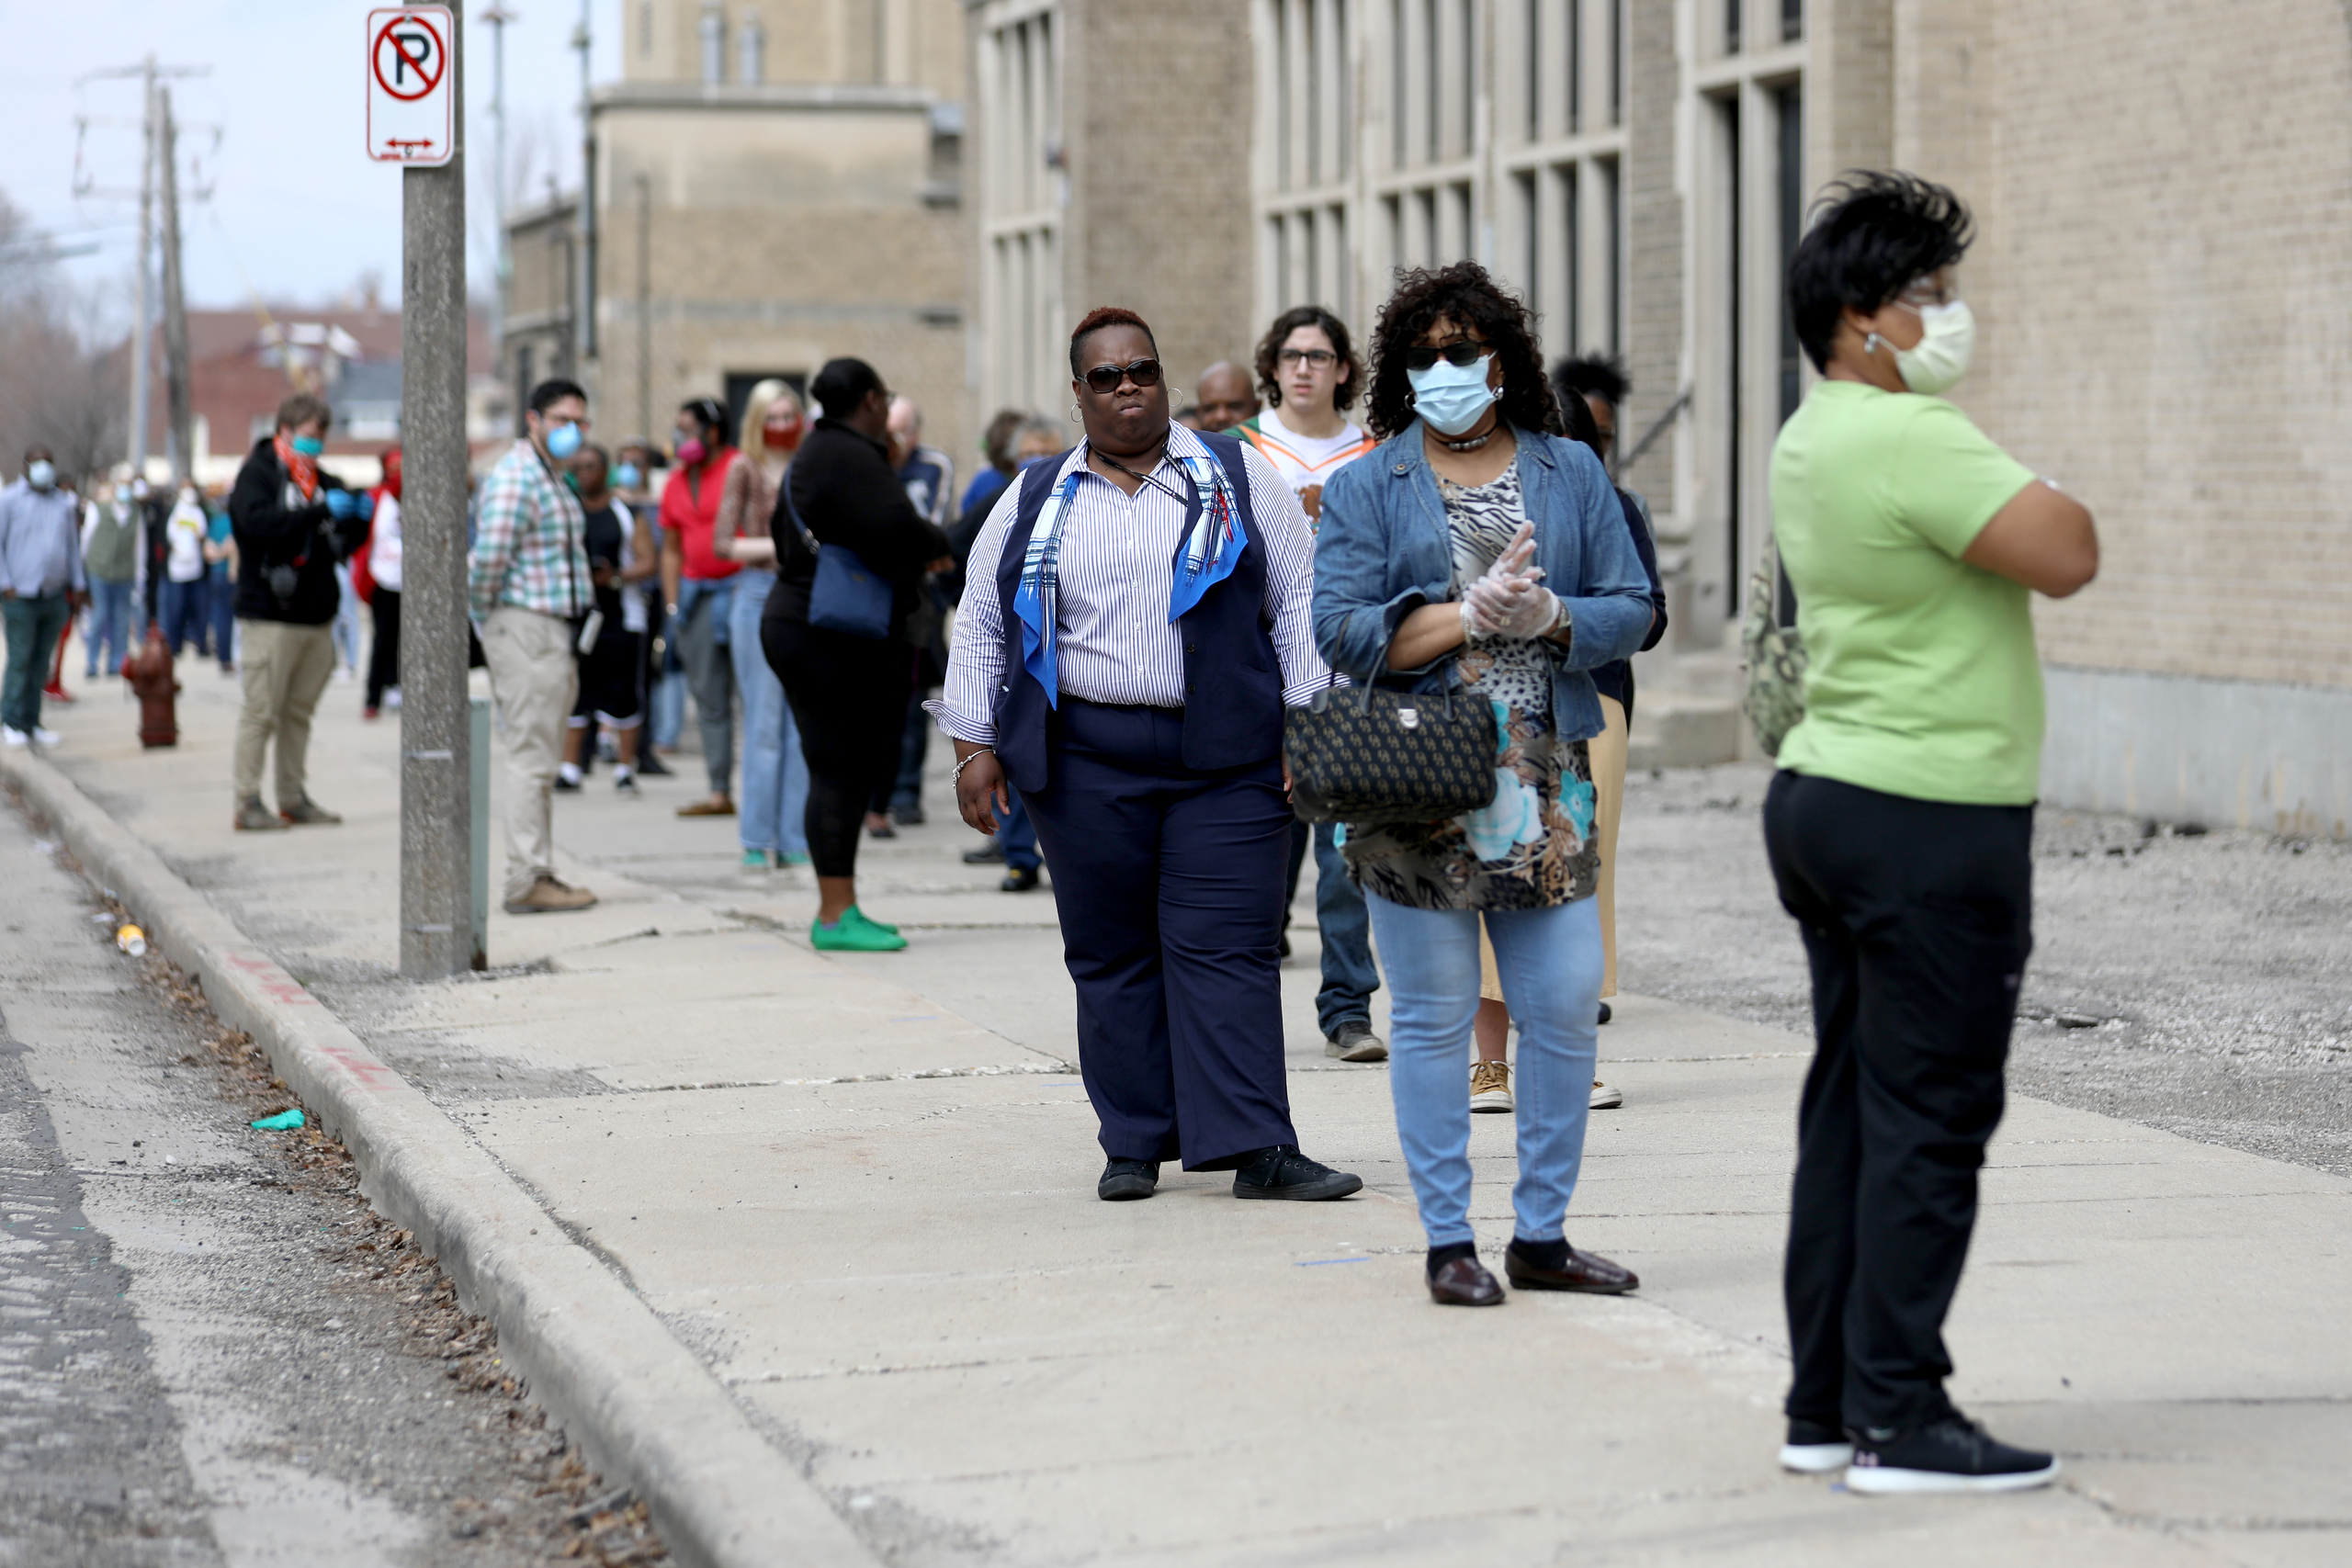 Voters waited for hours in long lines to vote in Milwaukee on April 7, 2020